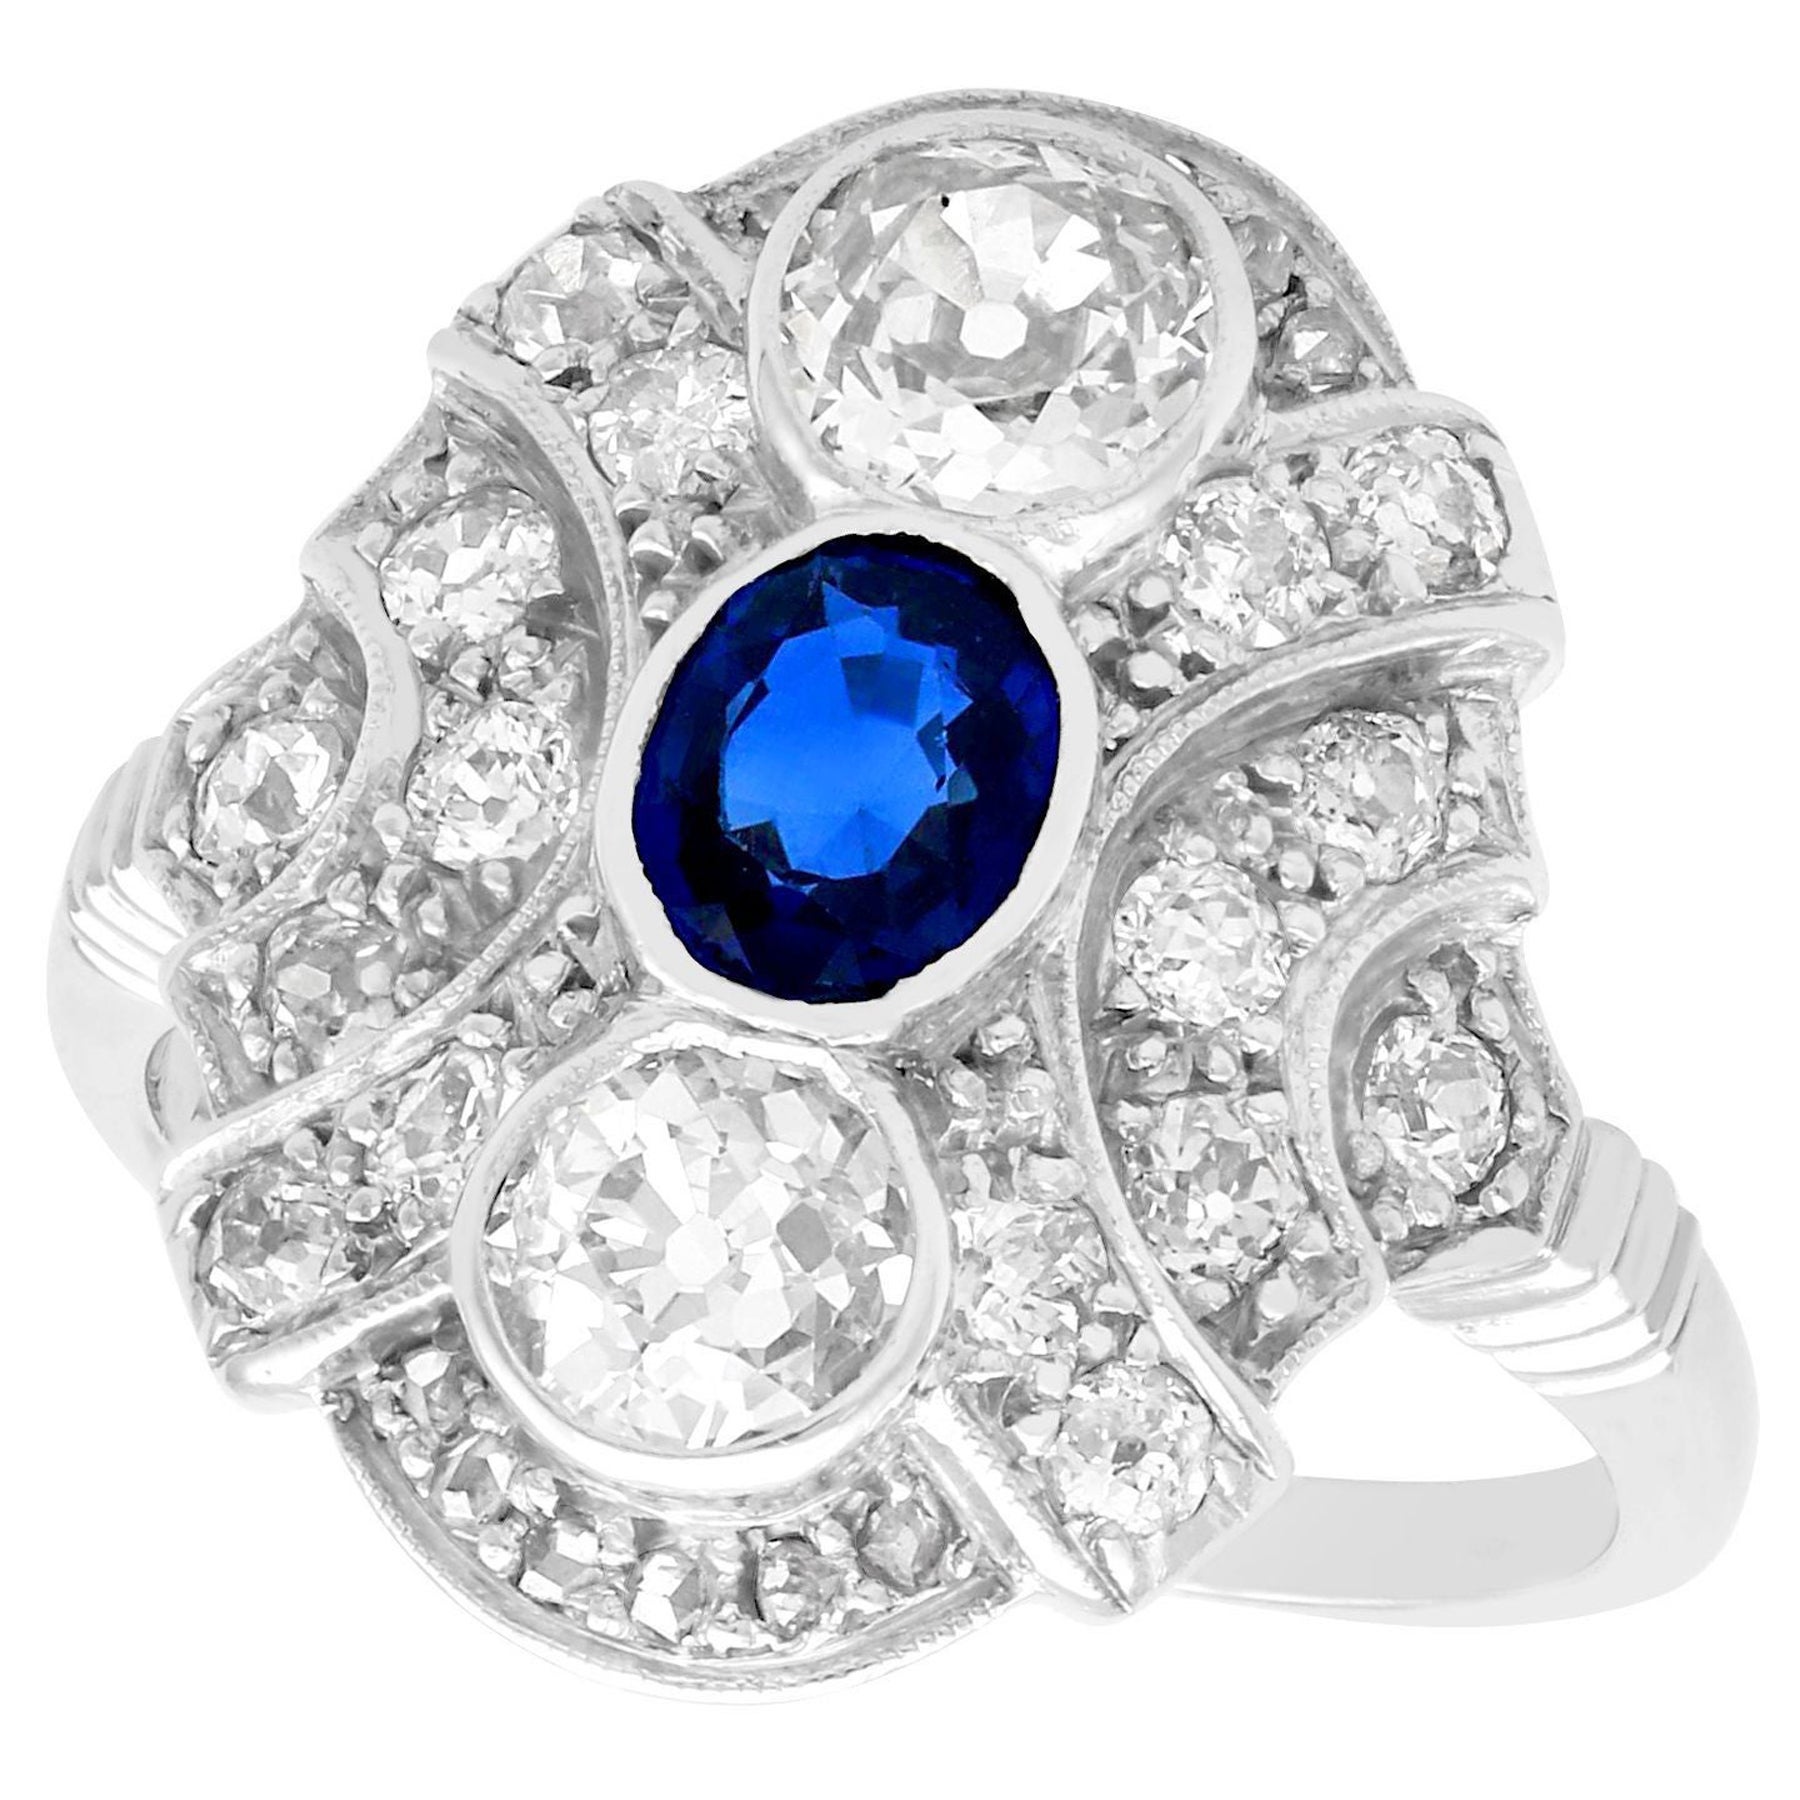 Antique Sapphire and 1.64 Carat Diamond White Gold Cocktail Ring, circa 1935